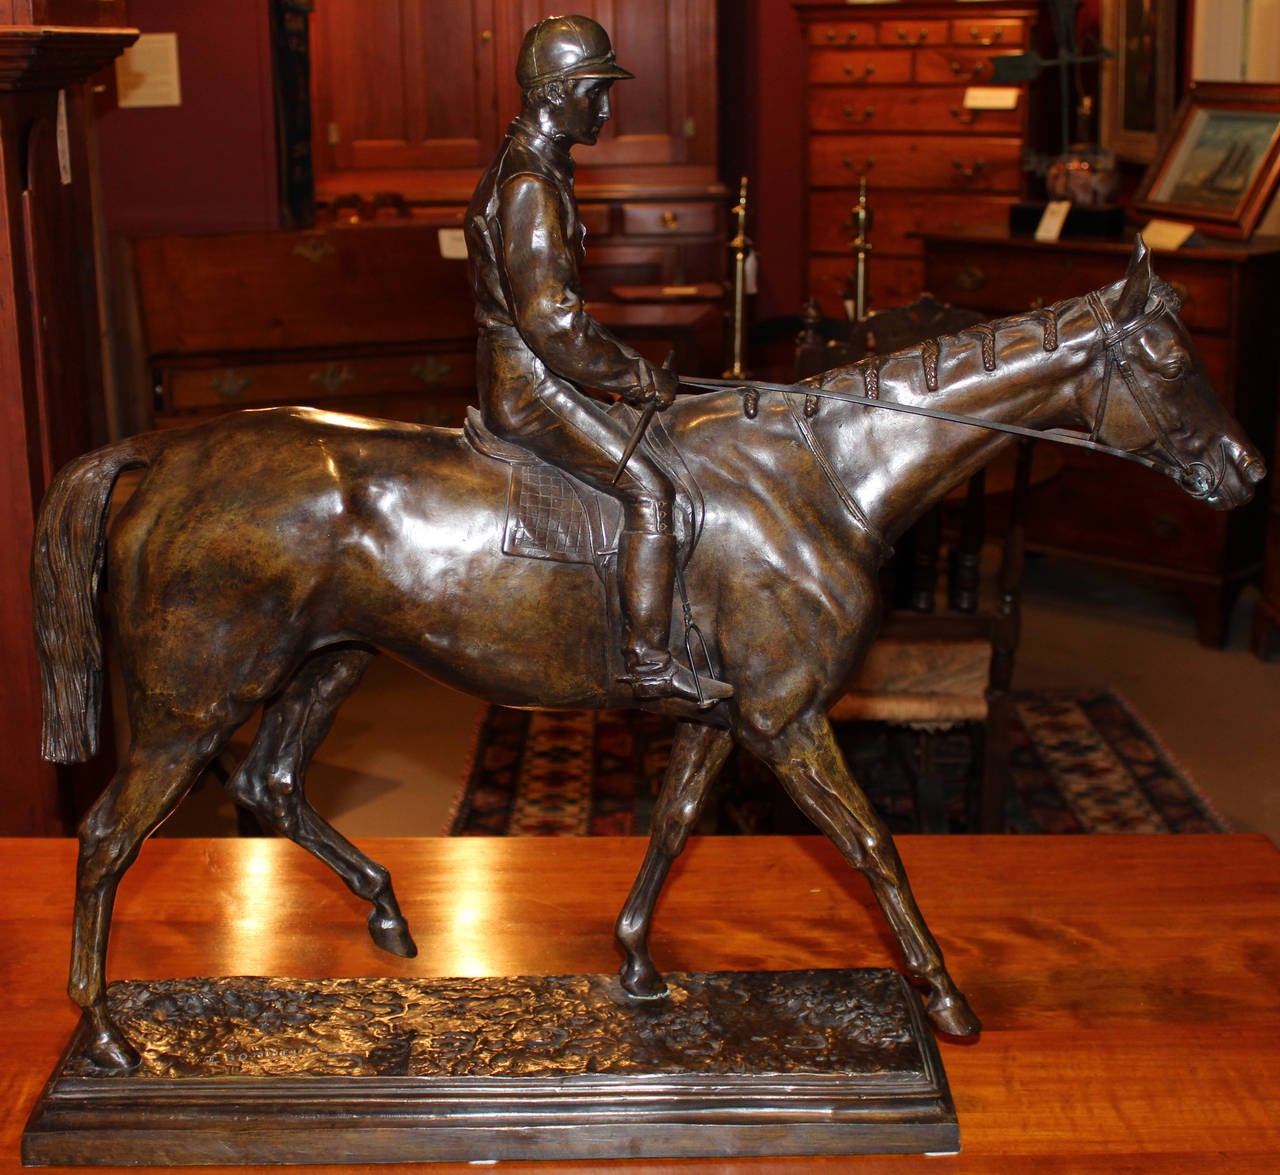 This patinated equestrian bronze casting titled Derby Winner or Jockey Sur Sa Monture was originally done by French artist Isidore Jules Bonheur (1827-1901). Bonheur was born in Bordeaux, France, the younger brother of Rosa Bonheur and he became